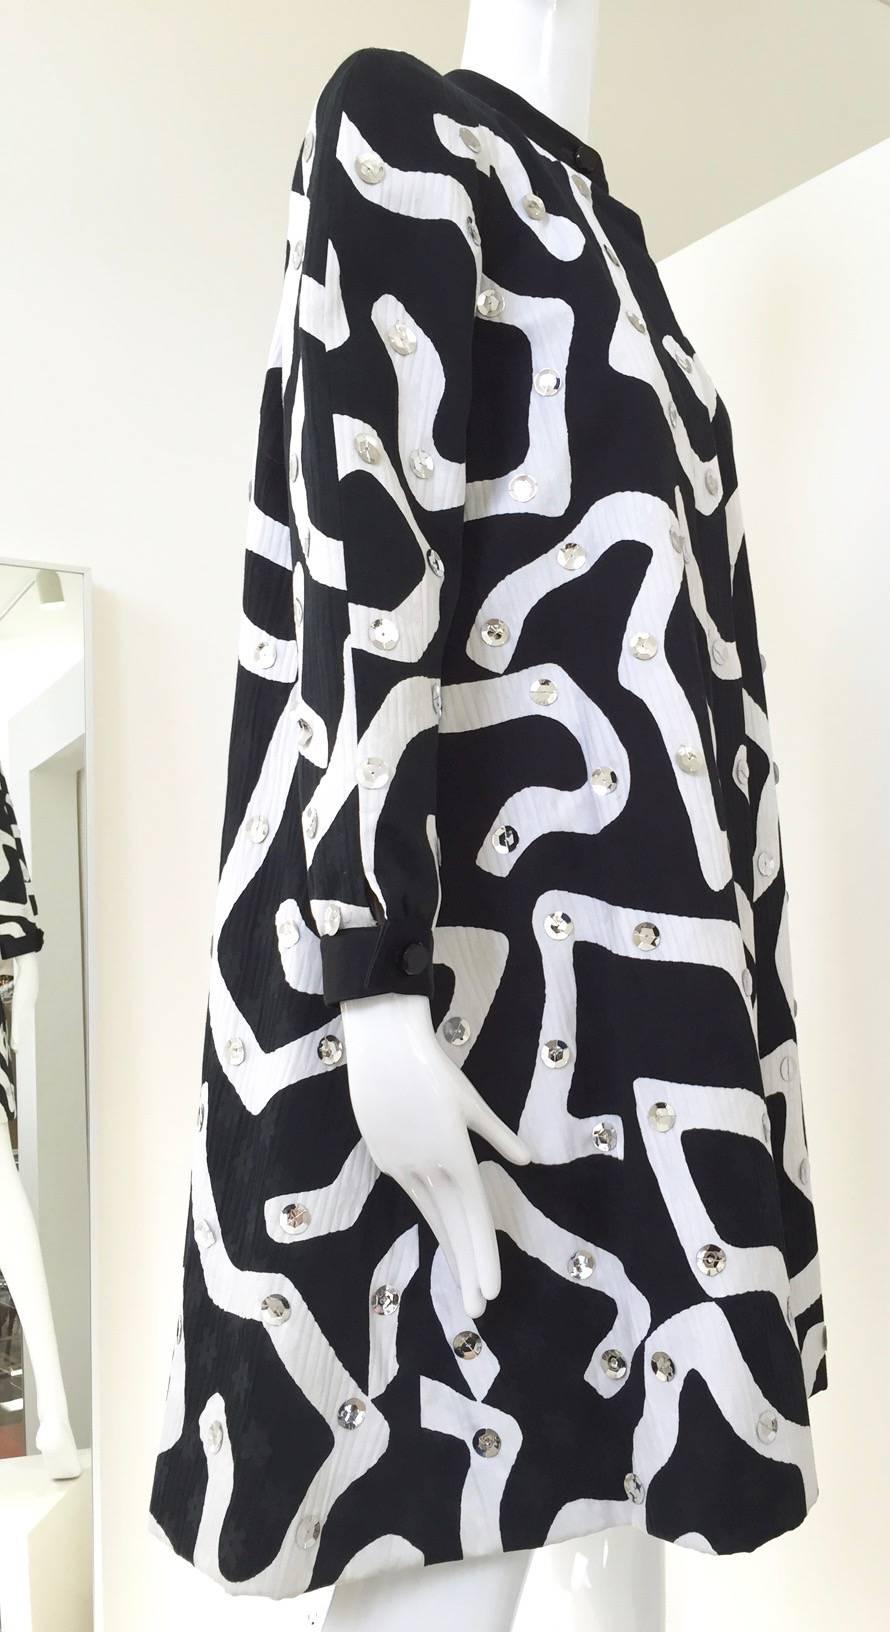 1980s Geoffrey Beene Blaack and White Abstract Print Cotton Dress 1